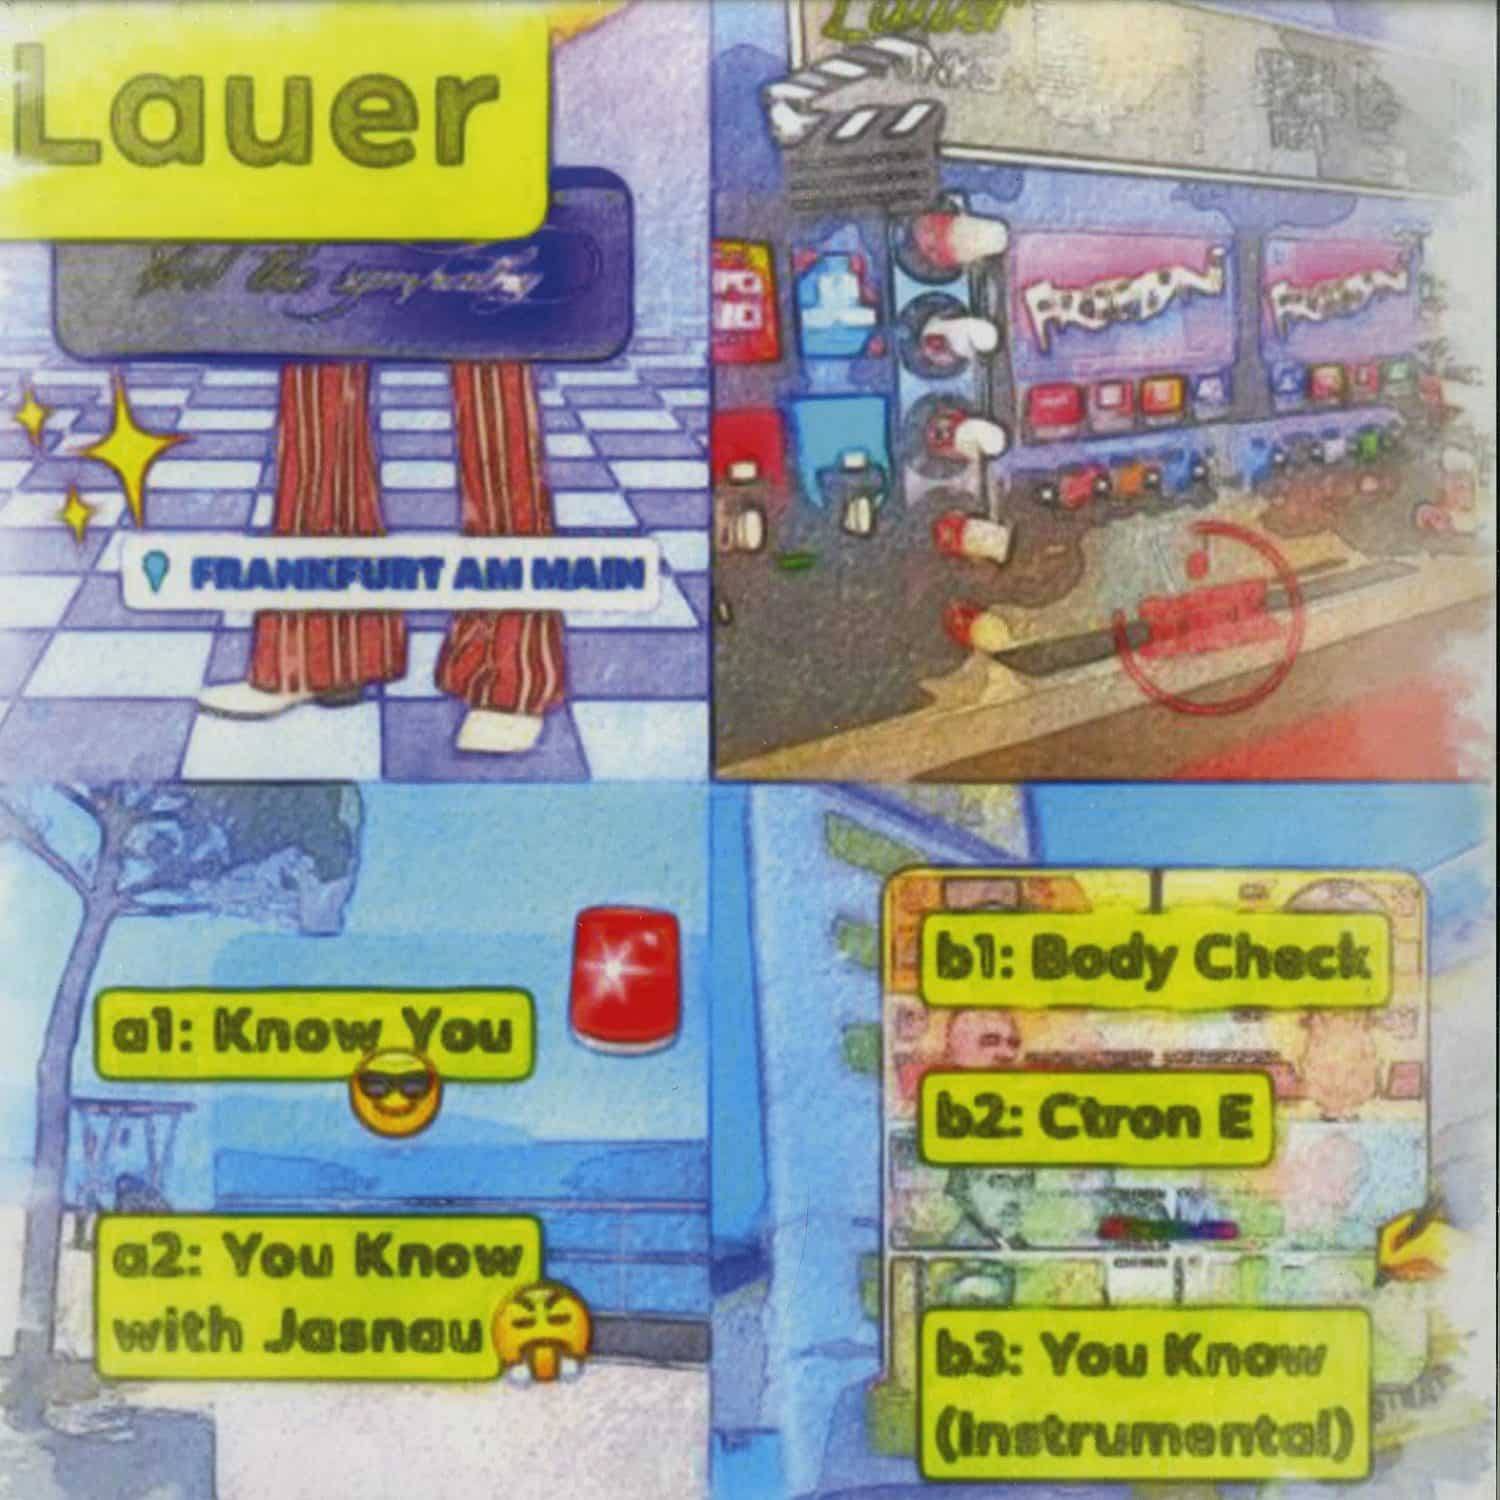 Lauer - KNOW YOU